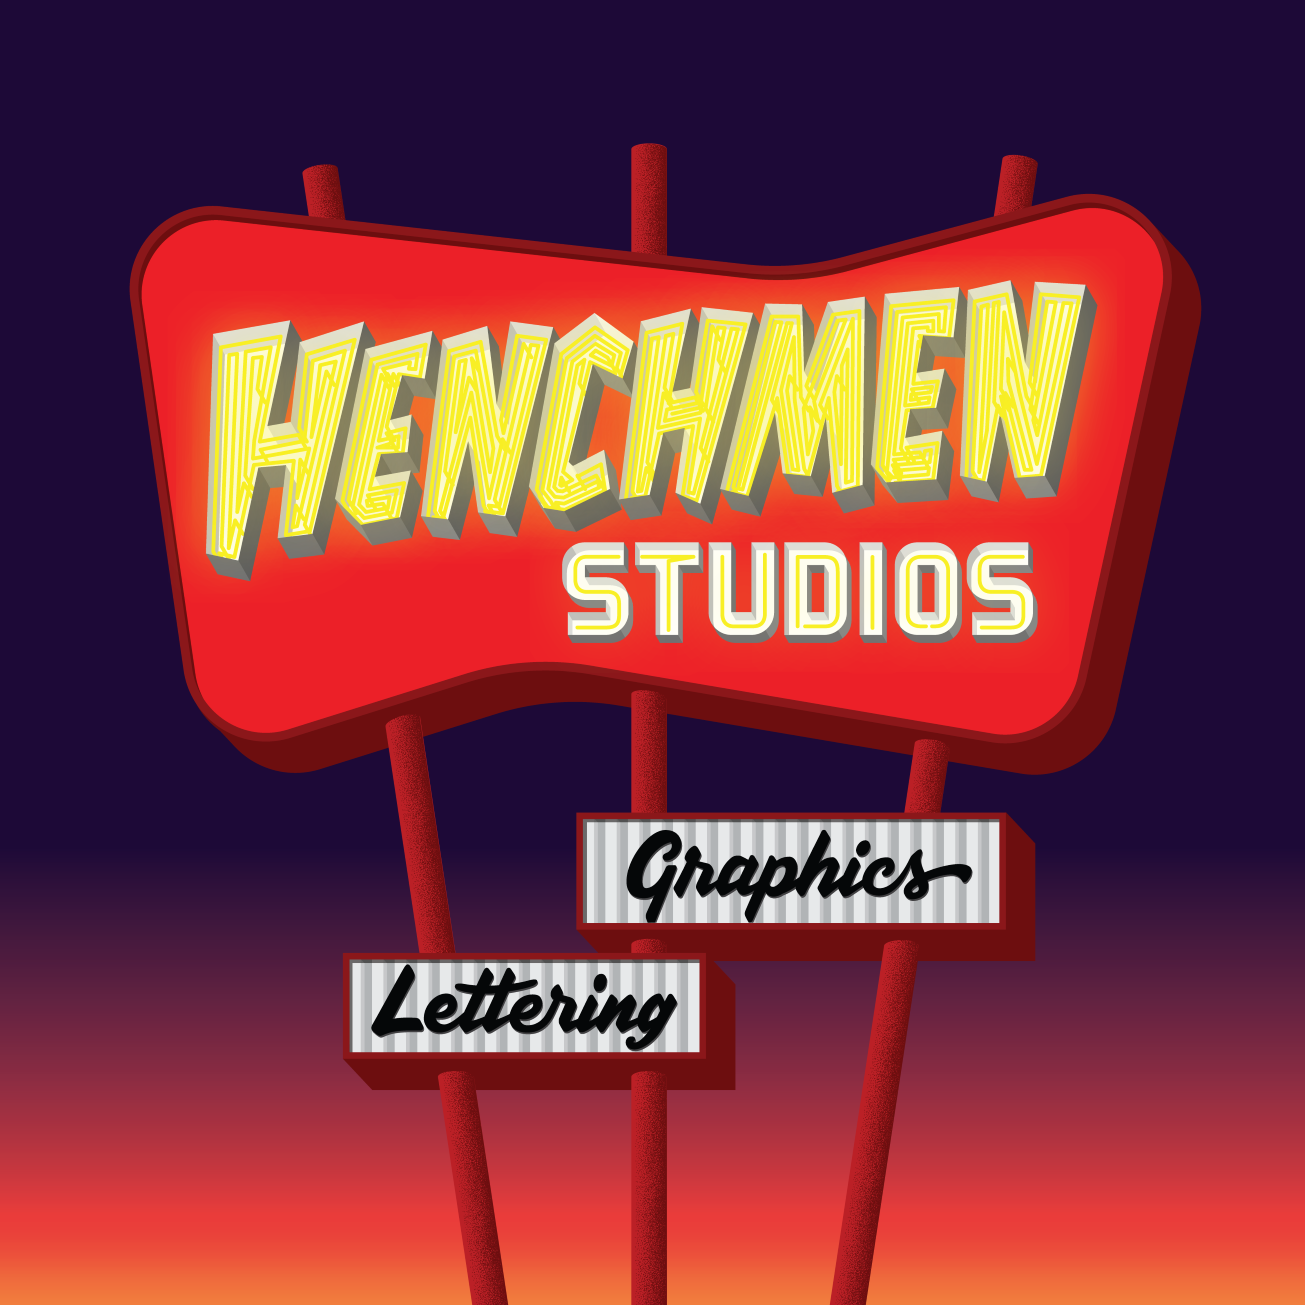 Illustration of a red billboard sign with yellow light up letters spelling Henchmen Studios